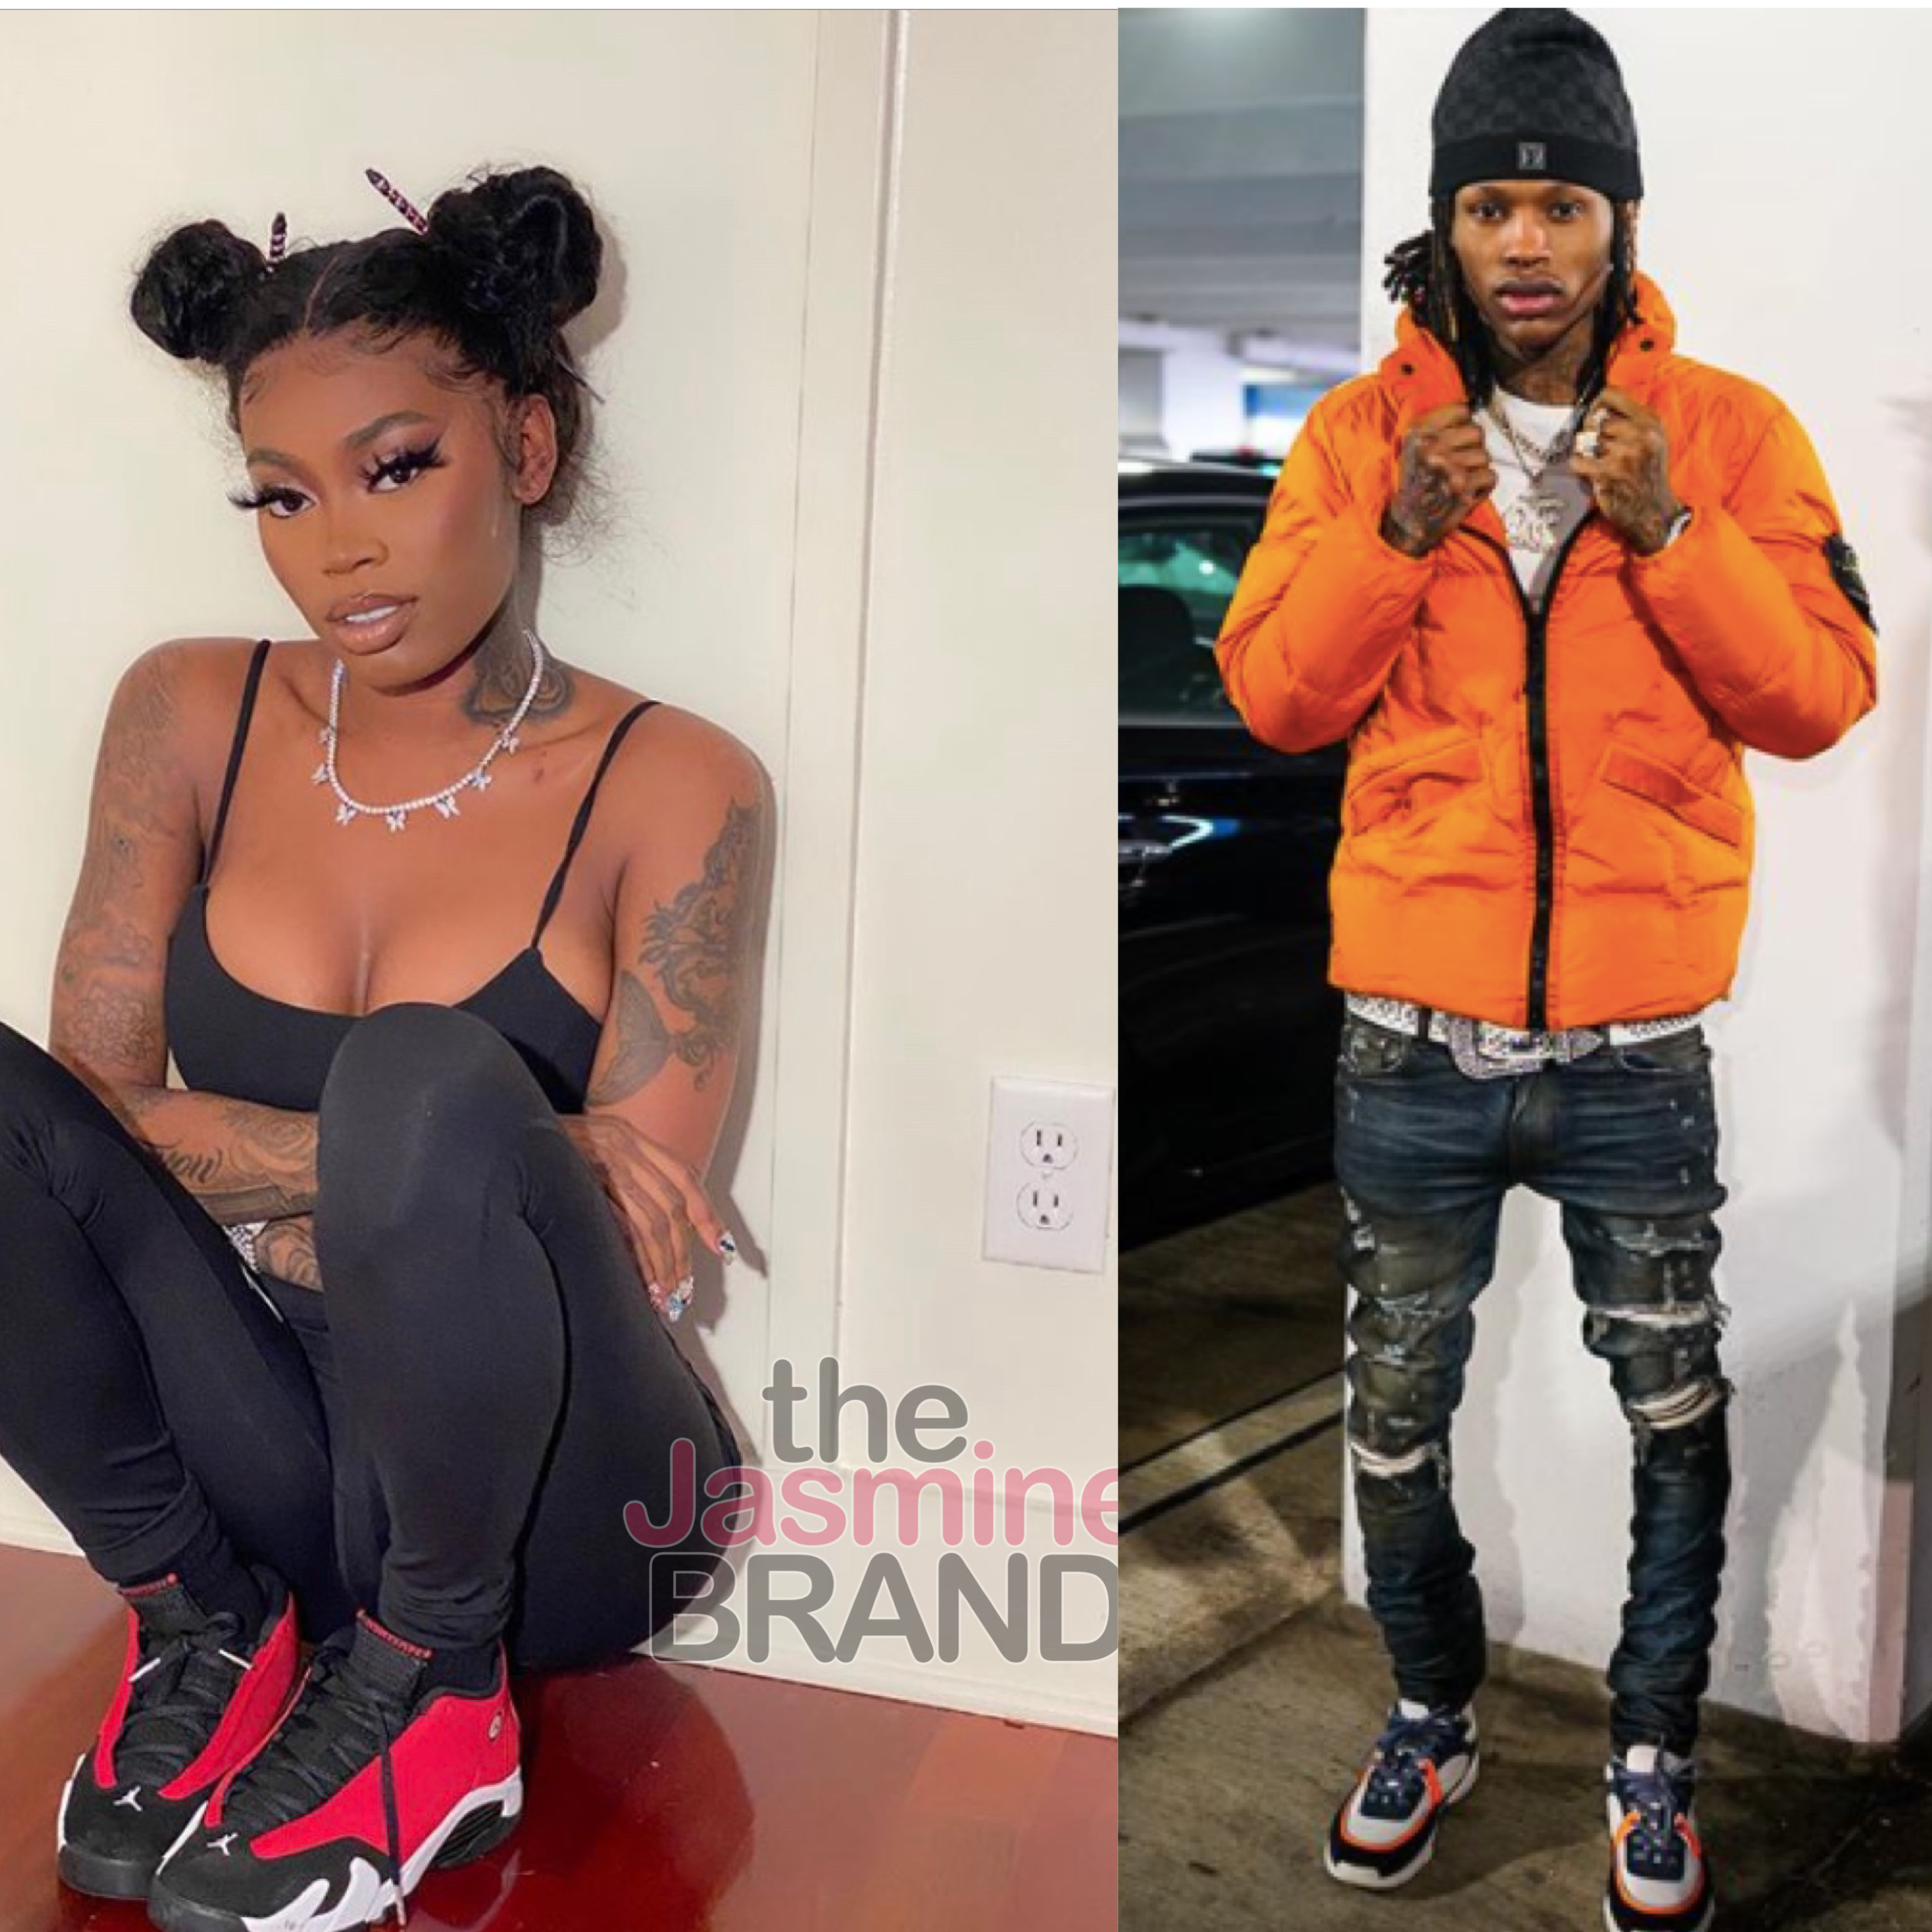 Asian Doll Mourns The Death Of Her Ex, Rapper King Von: I'm A Lost Soul  Somebody Help Me - theJasmineBRAND